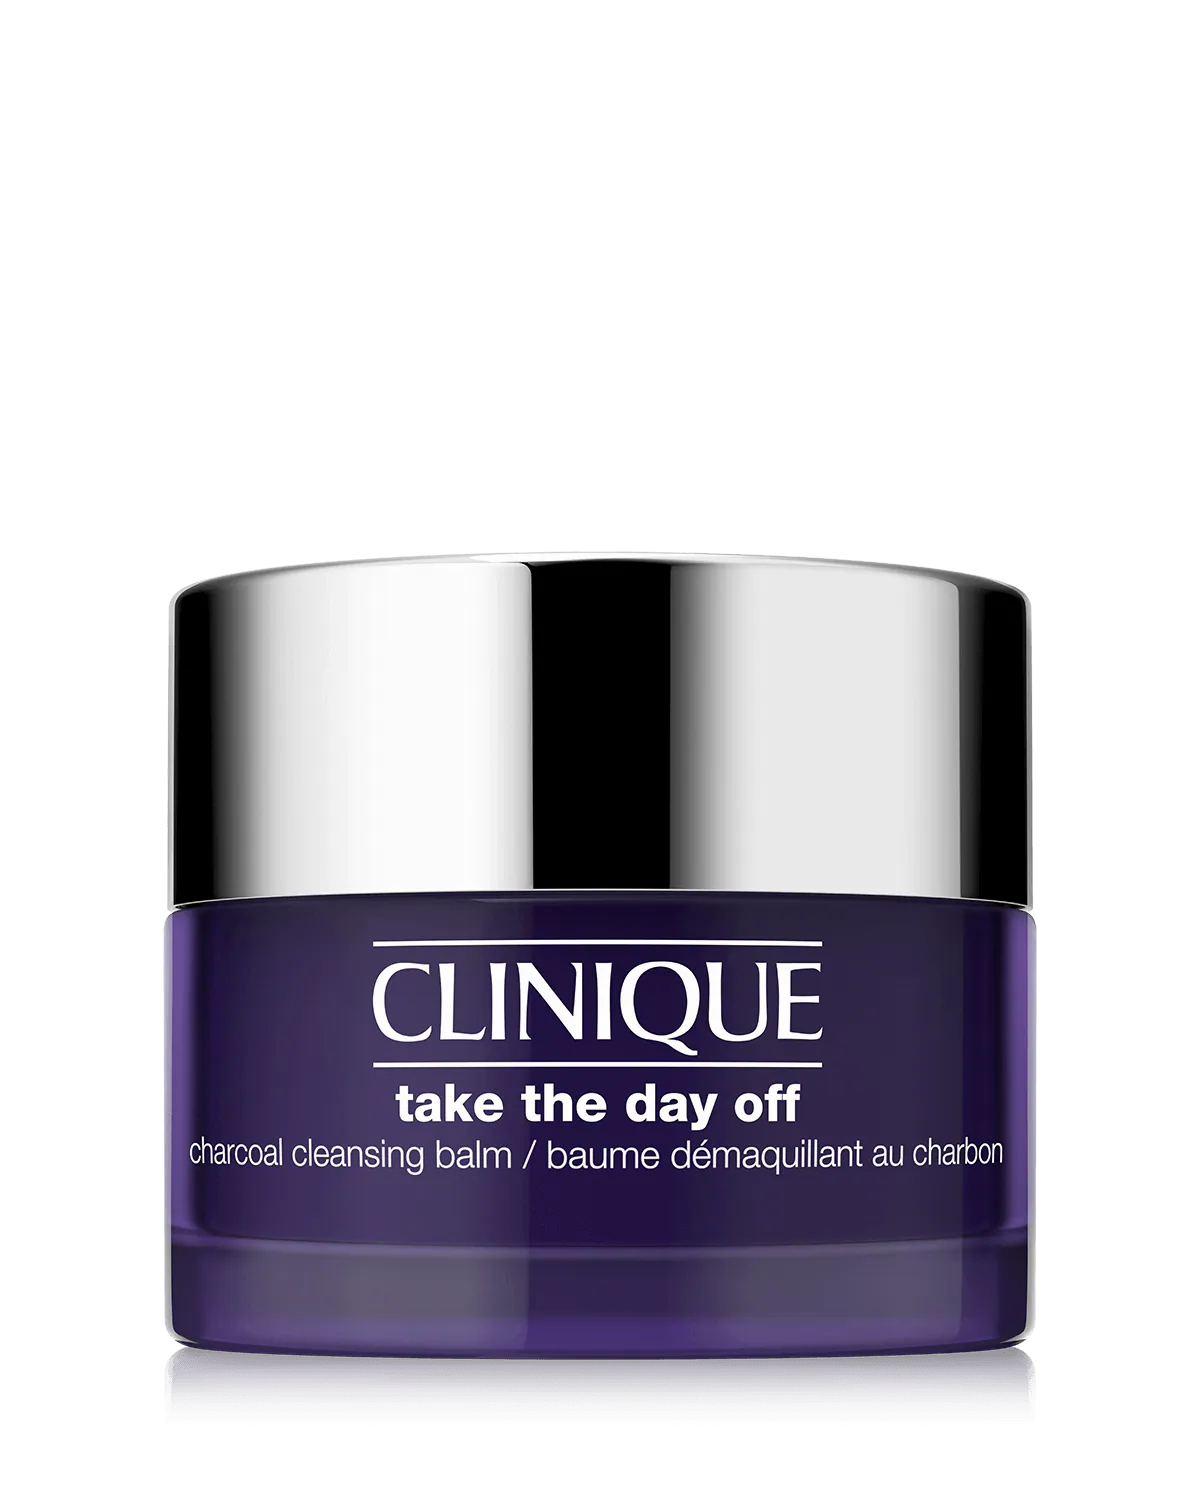 Clinique Take The Day Off Charcoal Cleansing Balm - .5oz / 15 mL